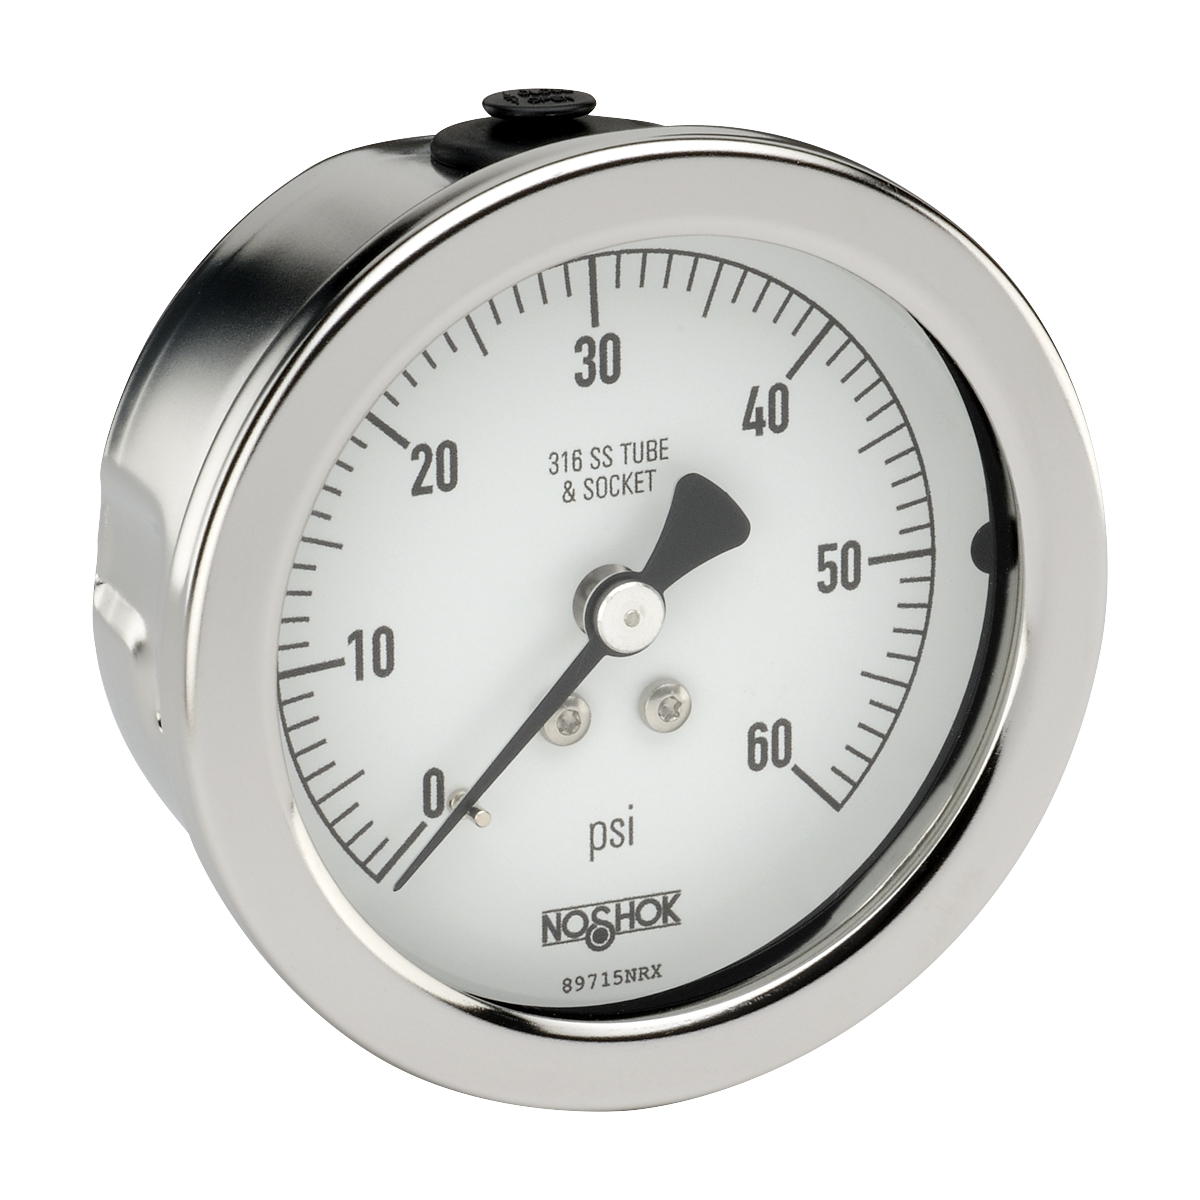 25-510-6000-psi-SPMC 400/500 Series All Stainless Steel Dry and Liquid Filled Pressure Gauges